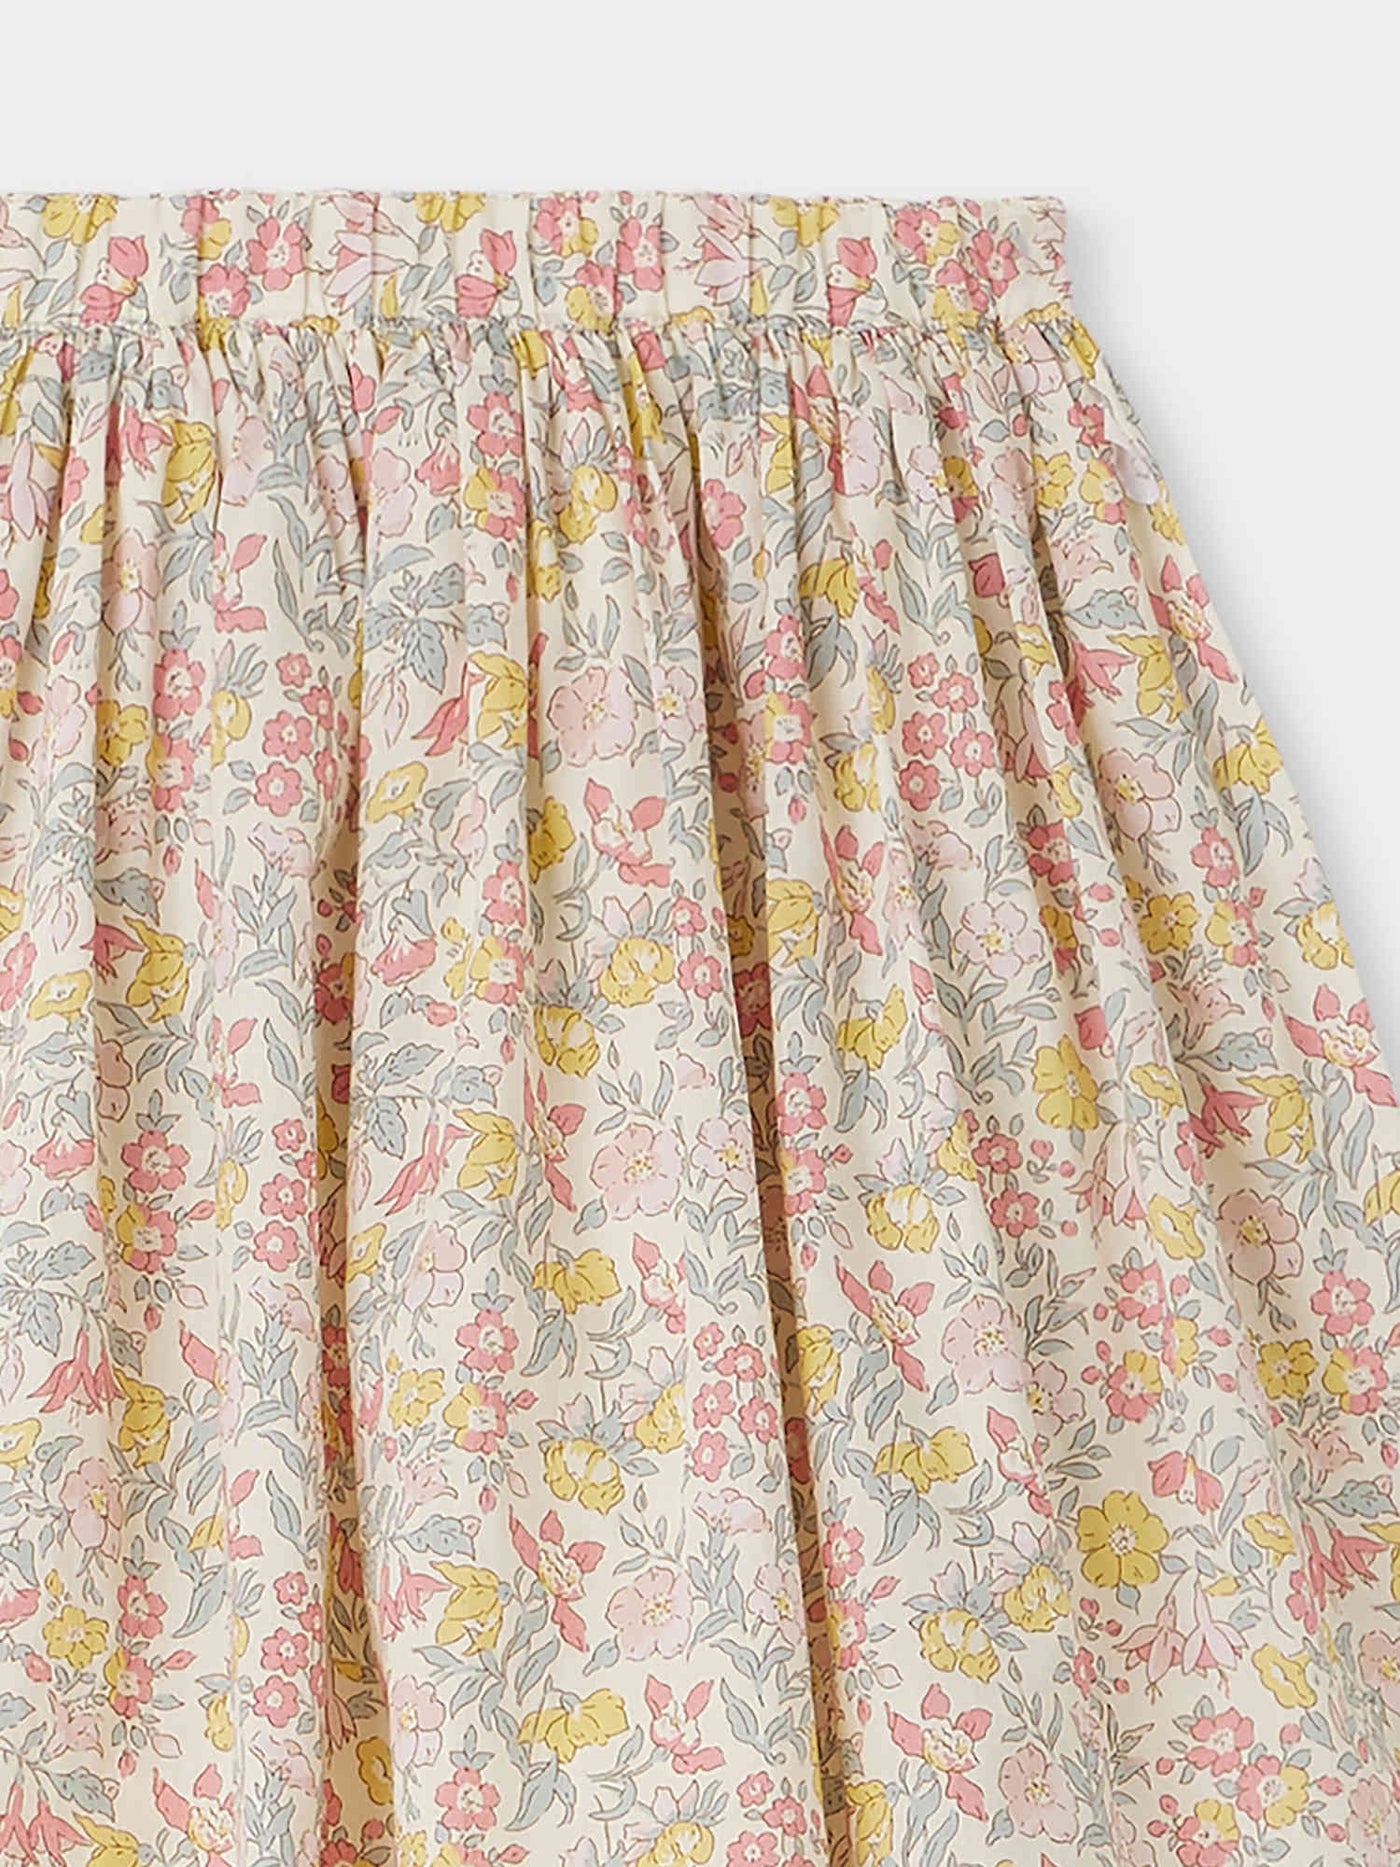 Suzon skirt in Liberty fabric